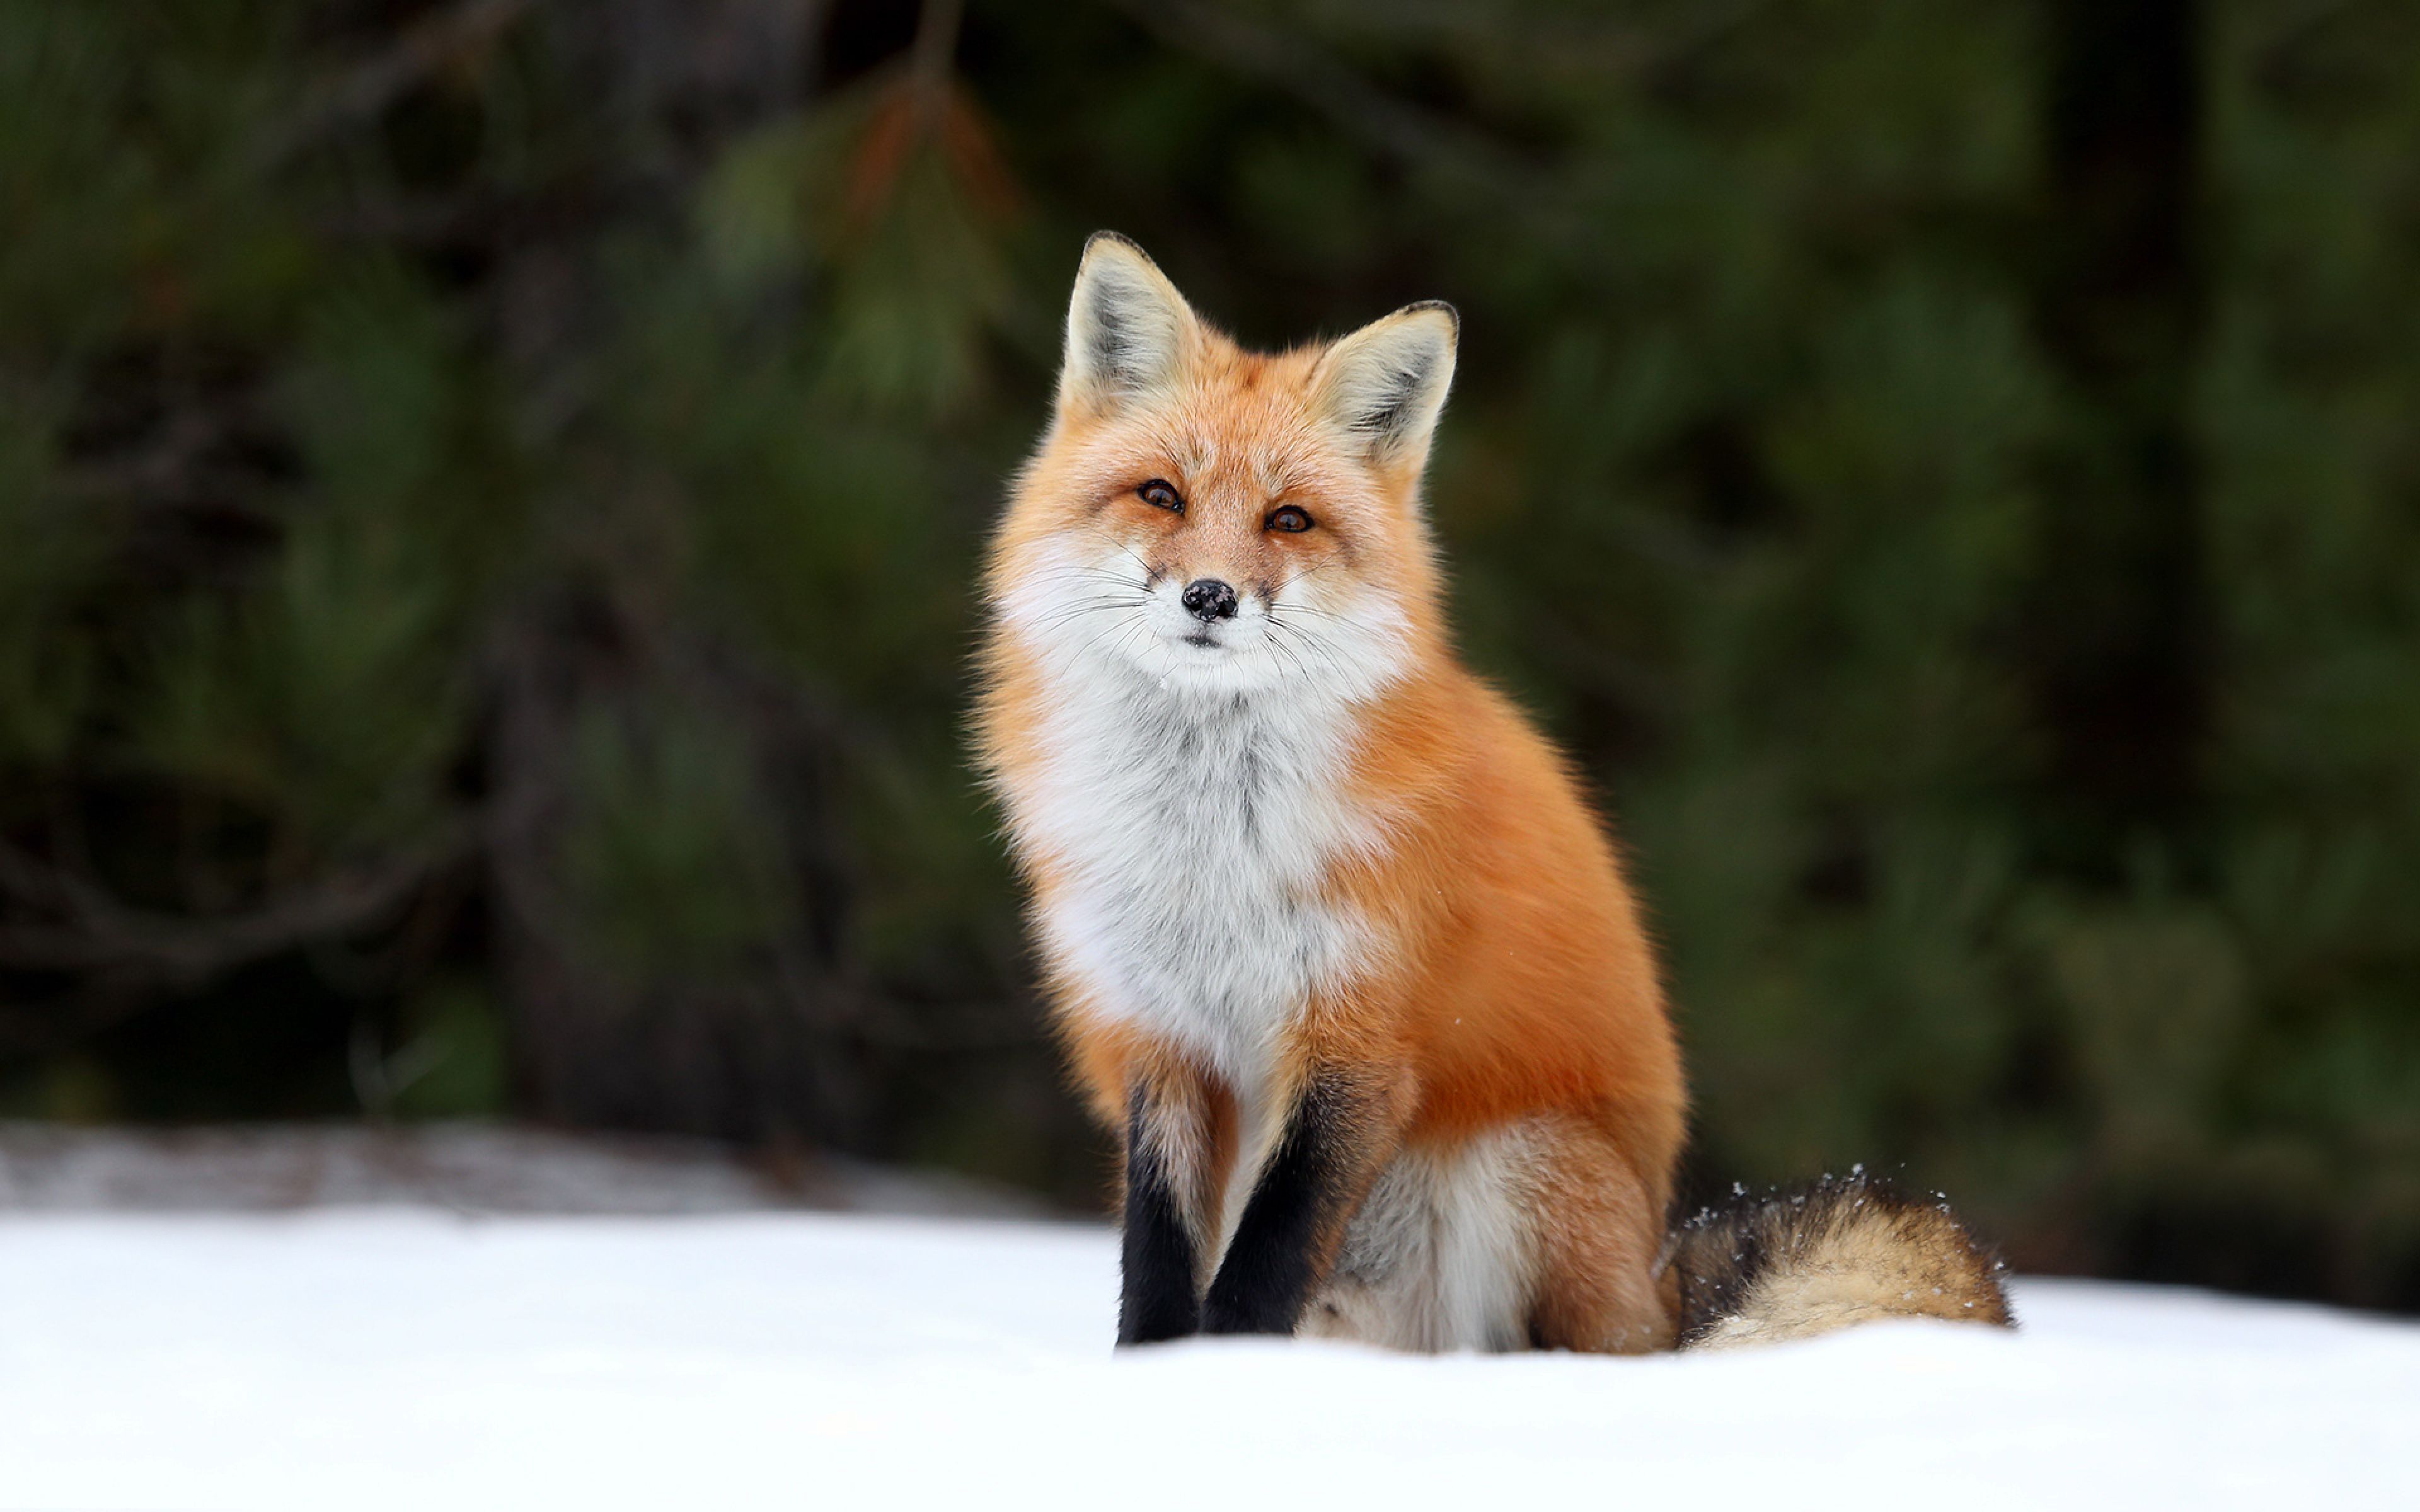 Foxes Wallpaper. Sledding Foxes Wallpaper, Foxes Wallpaper and Spirit Animals Foxes Laptop Background